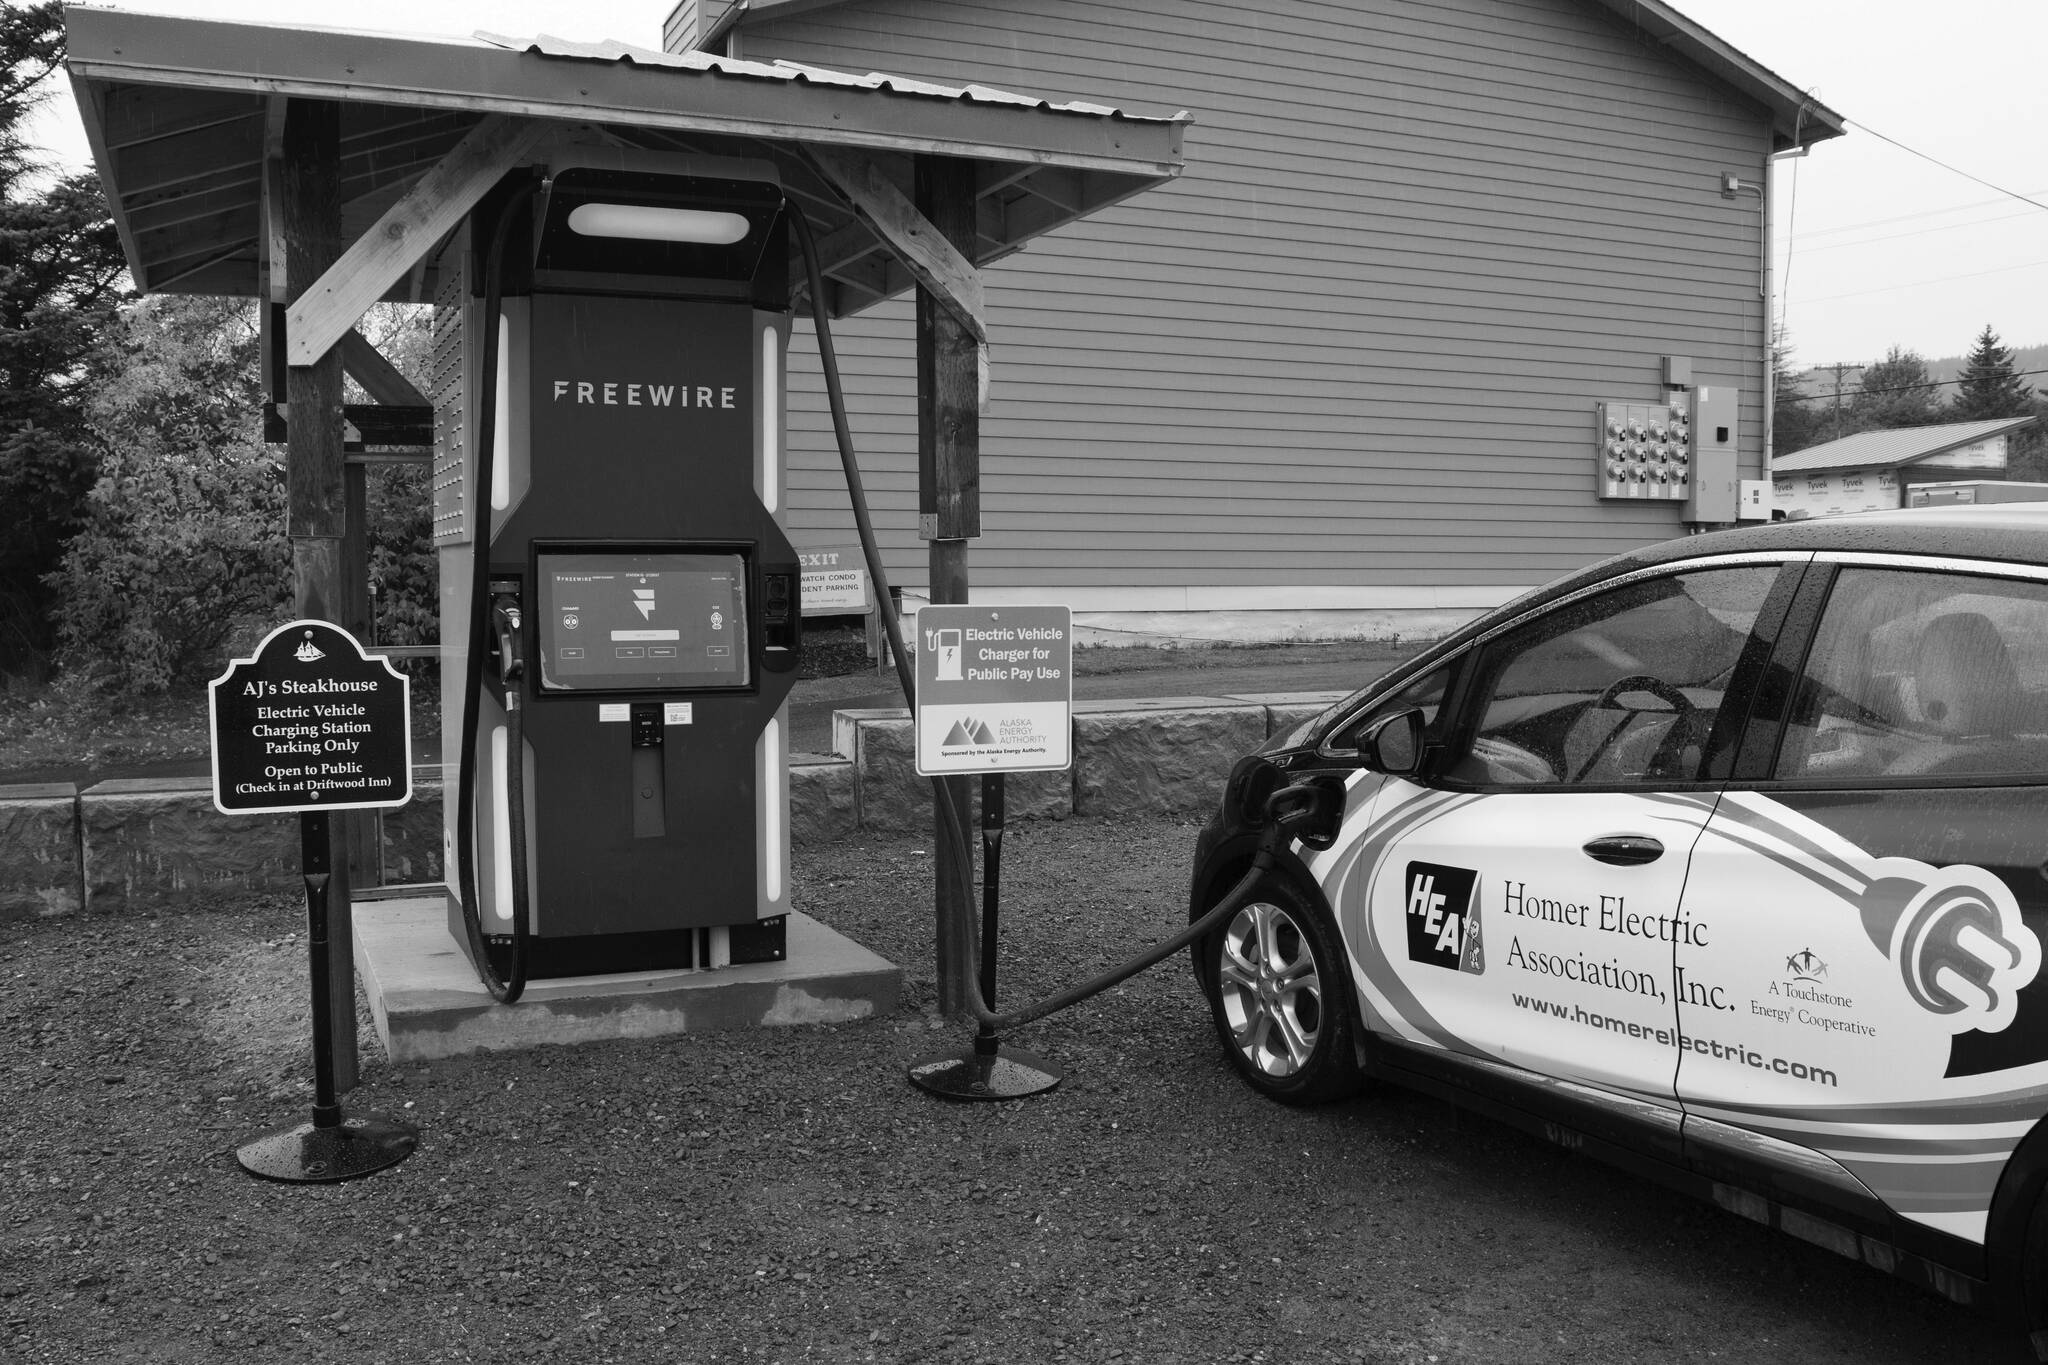 The very first FreeWire ultrafast Electric Vehicle charger in Alaska was installed at AJ’s Steakhouse last week. The charging station is the first of nine EV charging stations that will connect Homer to Fairbanks. (Photo by Sarah Knapp/Homer News)